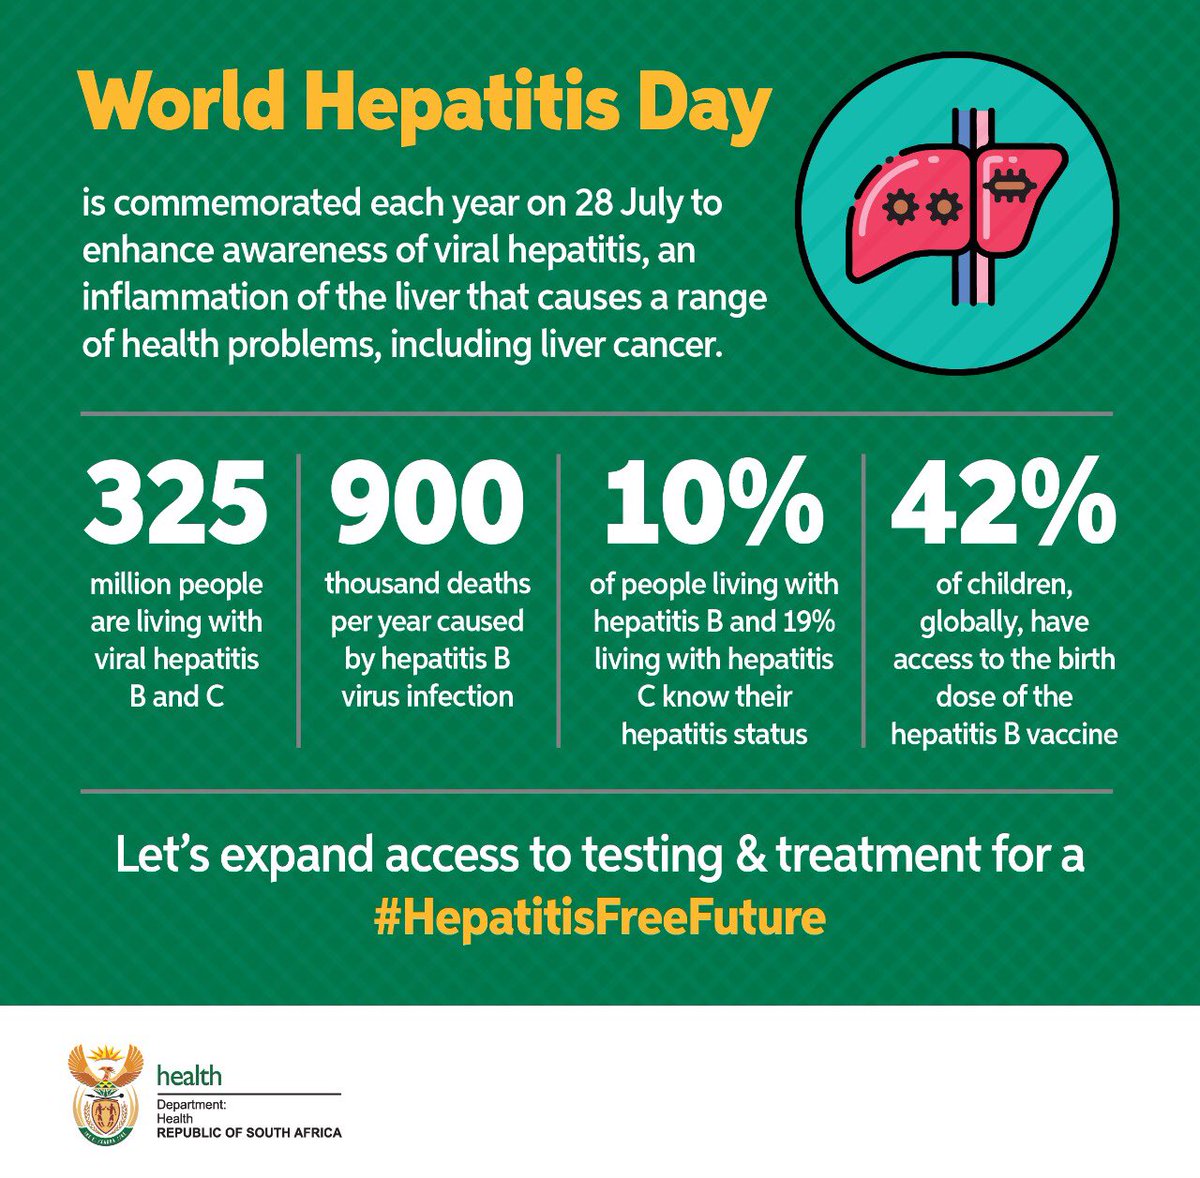 Today is World Hepatitis Day 
Let’s expand access to testing & treatment for a #HepatitisFreeFuture